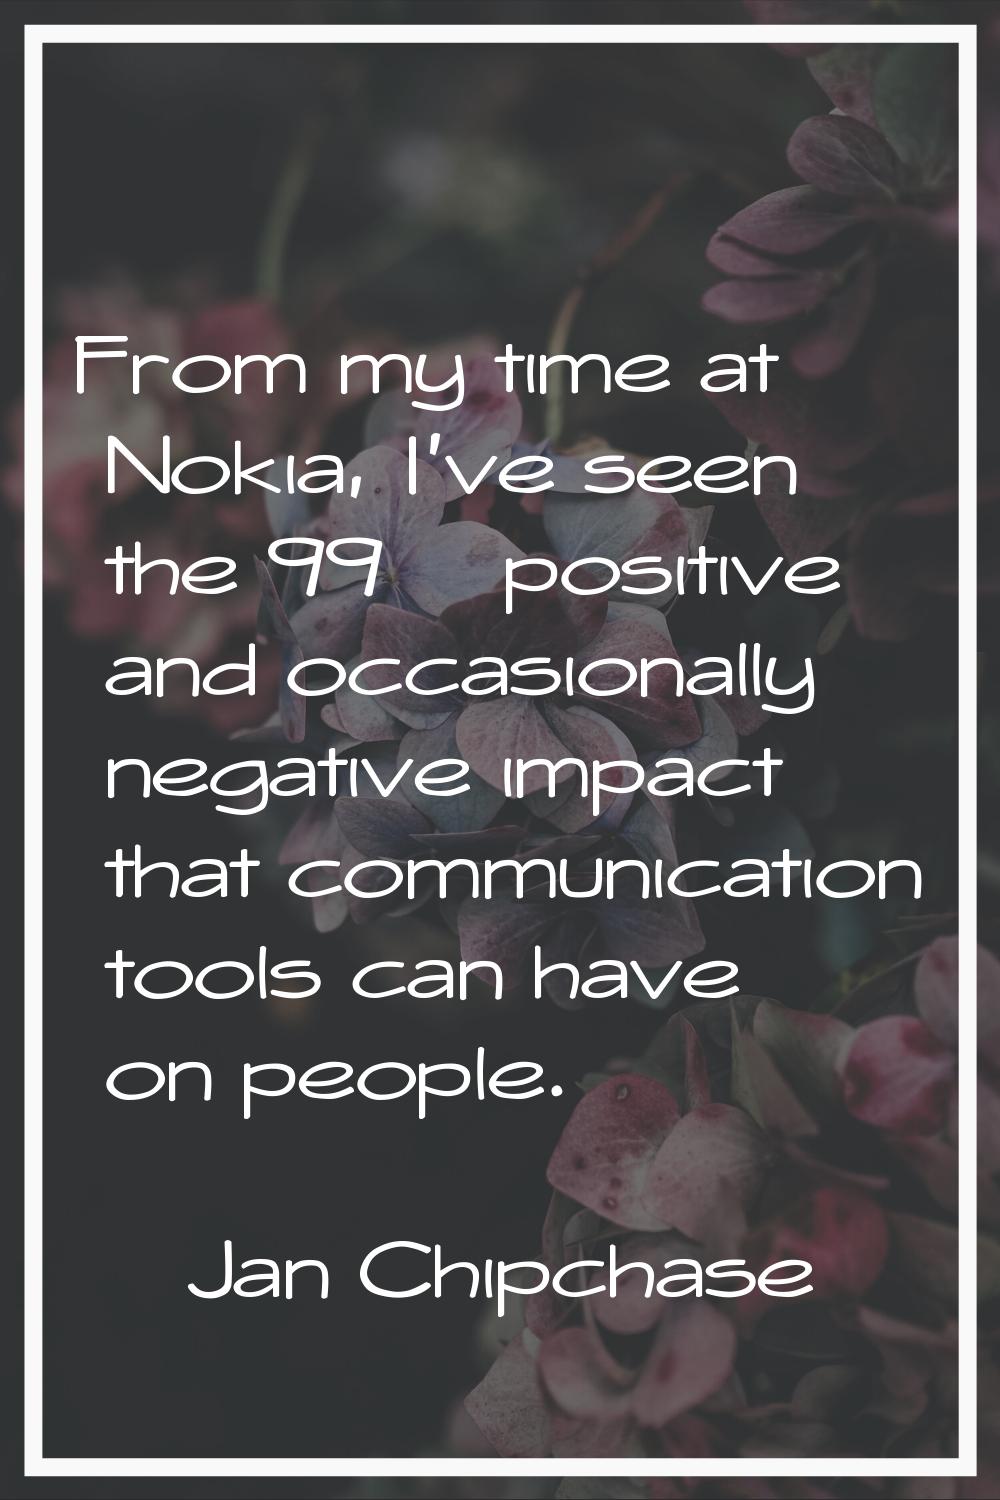 From my time at Nokia, I've seen the 99% positive and occasionally negative impact that communicati